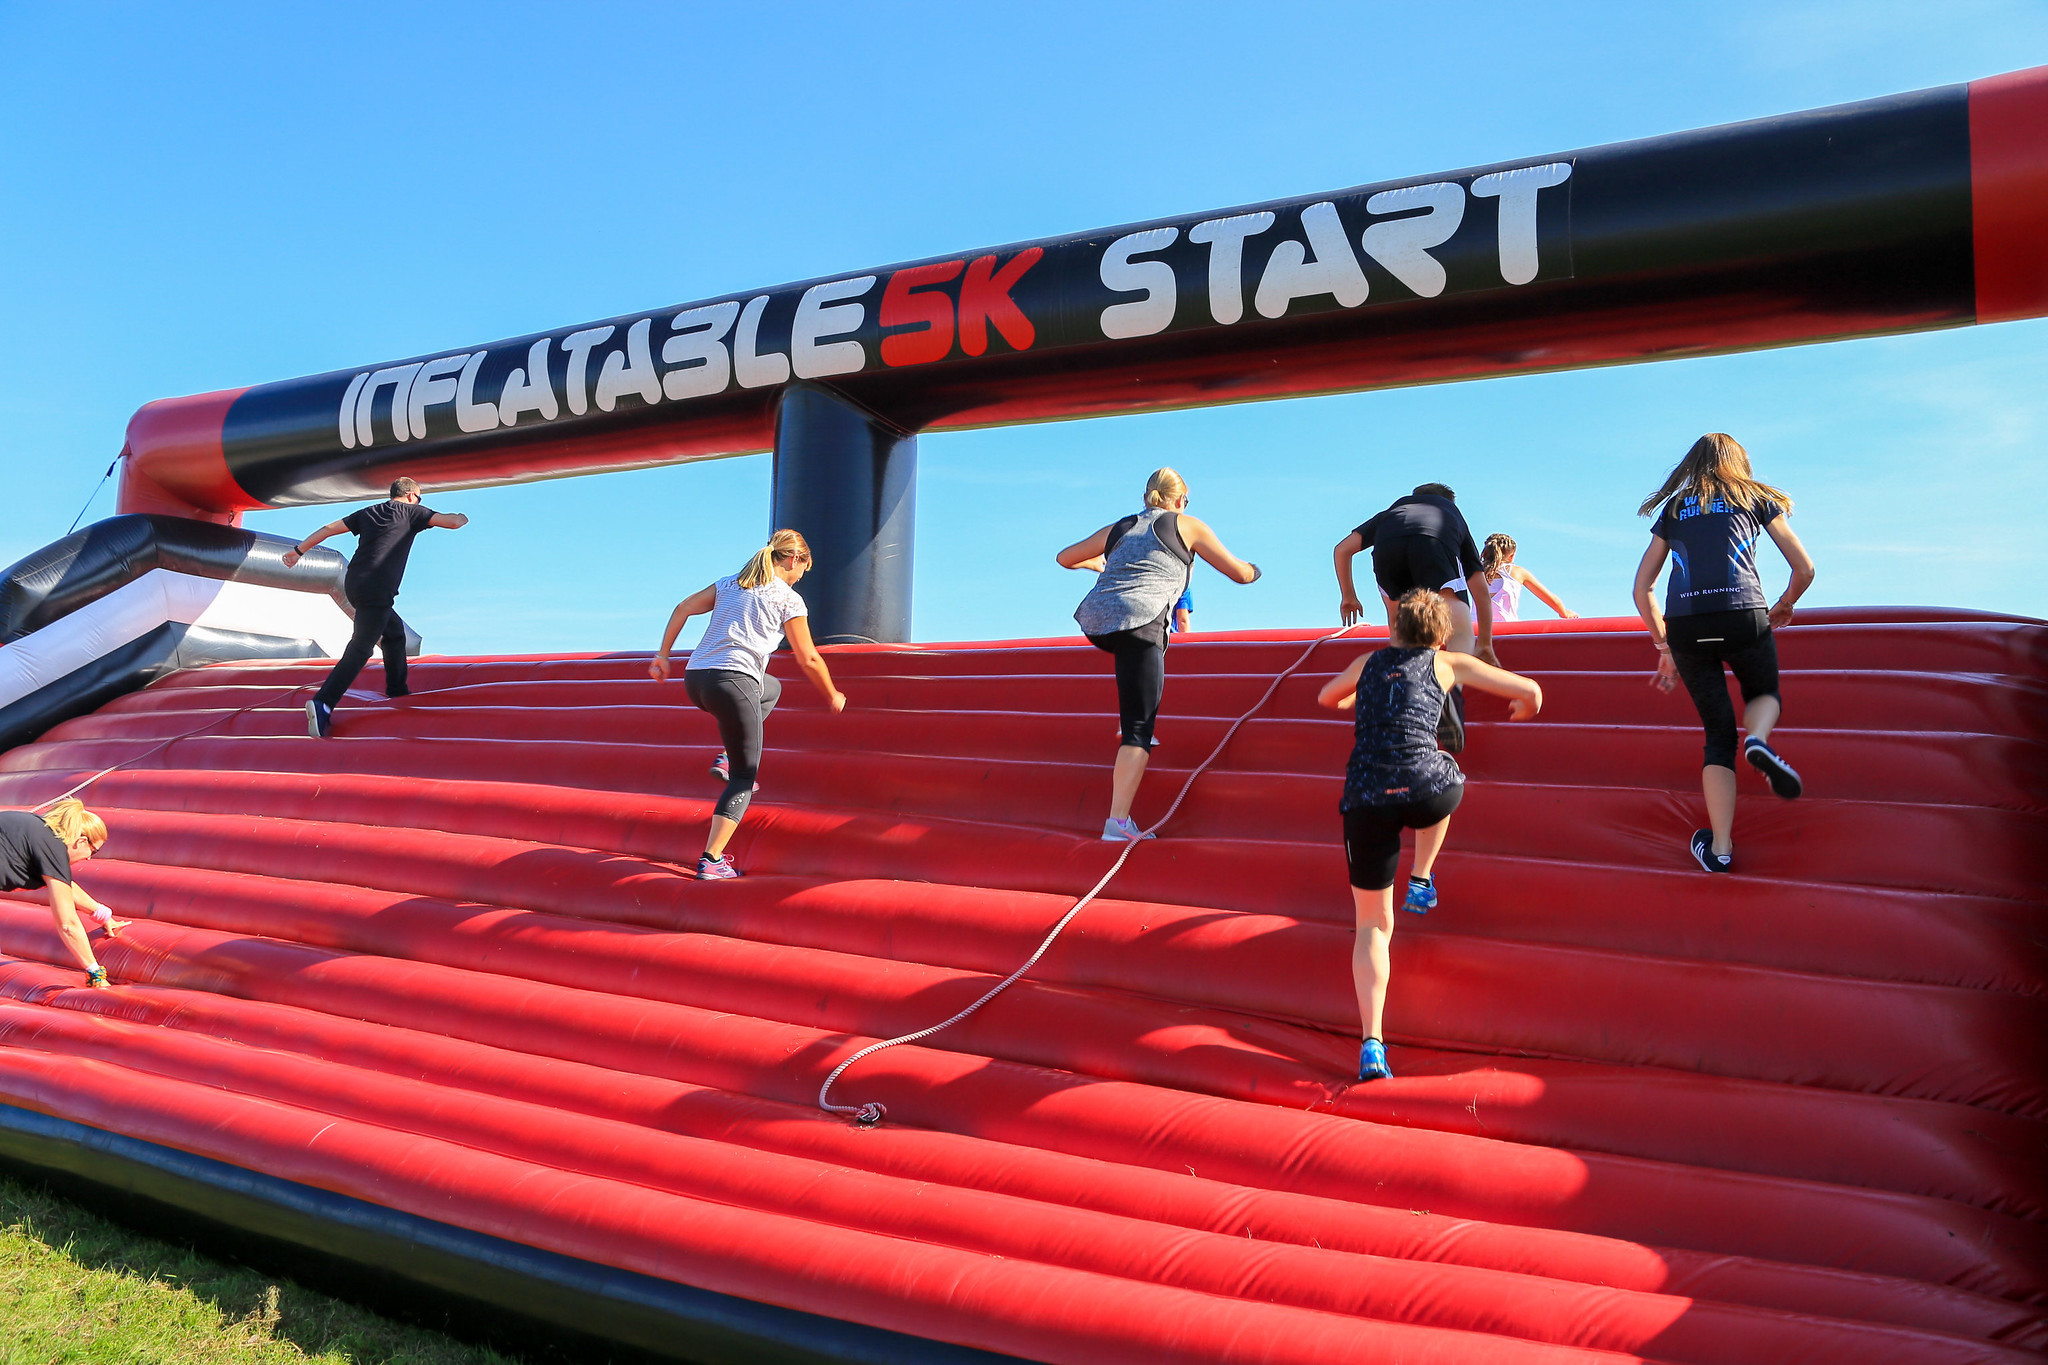 Inflatable 5k participants climb over an inflatable obstacle.